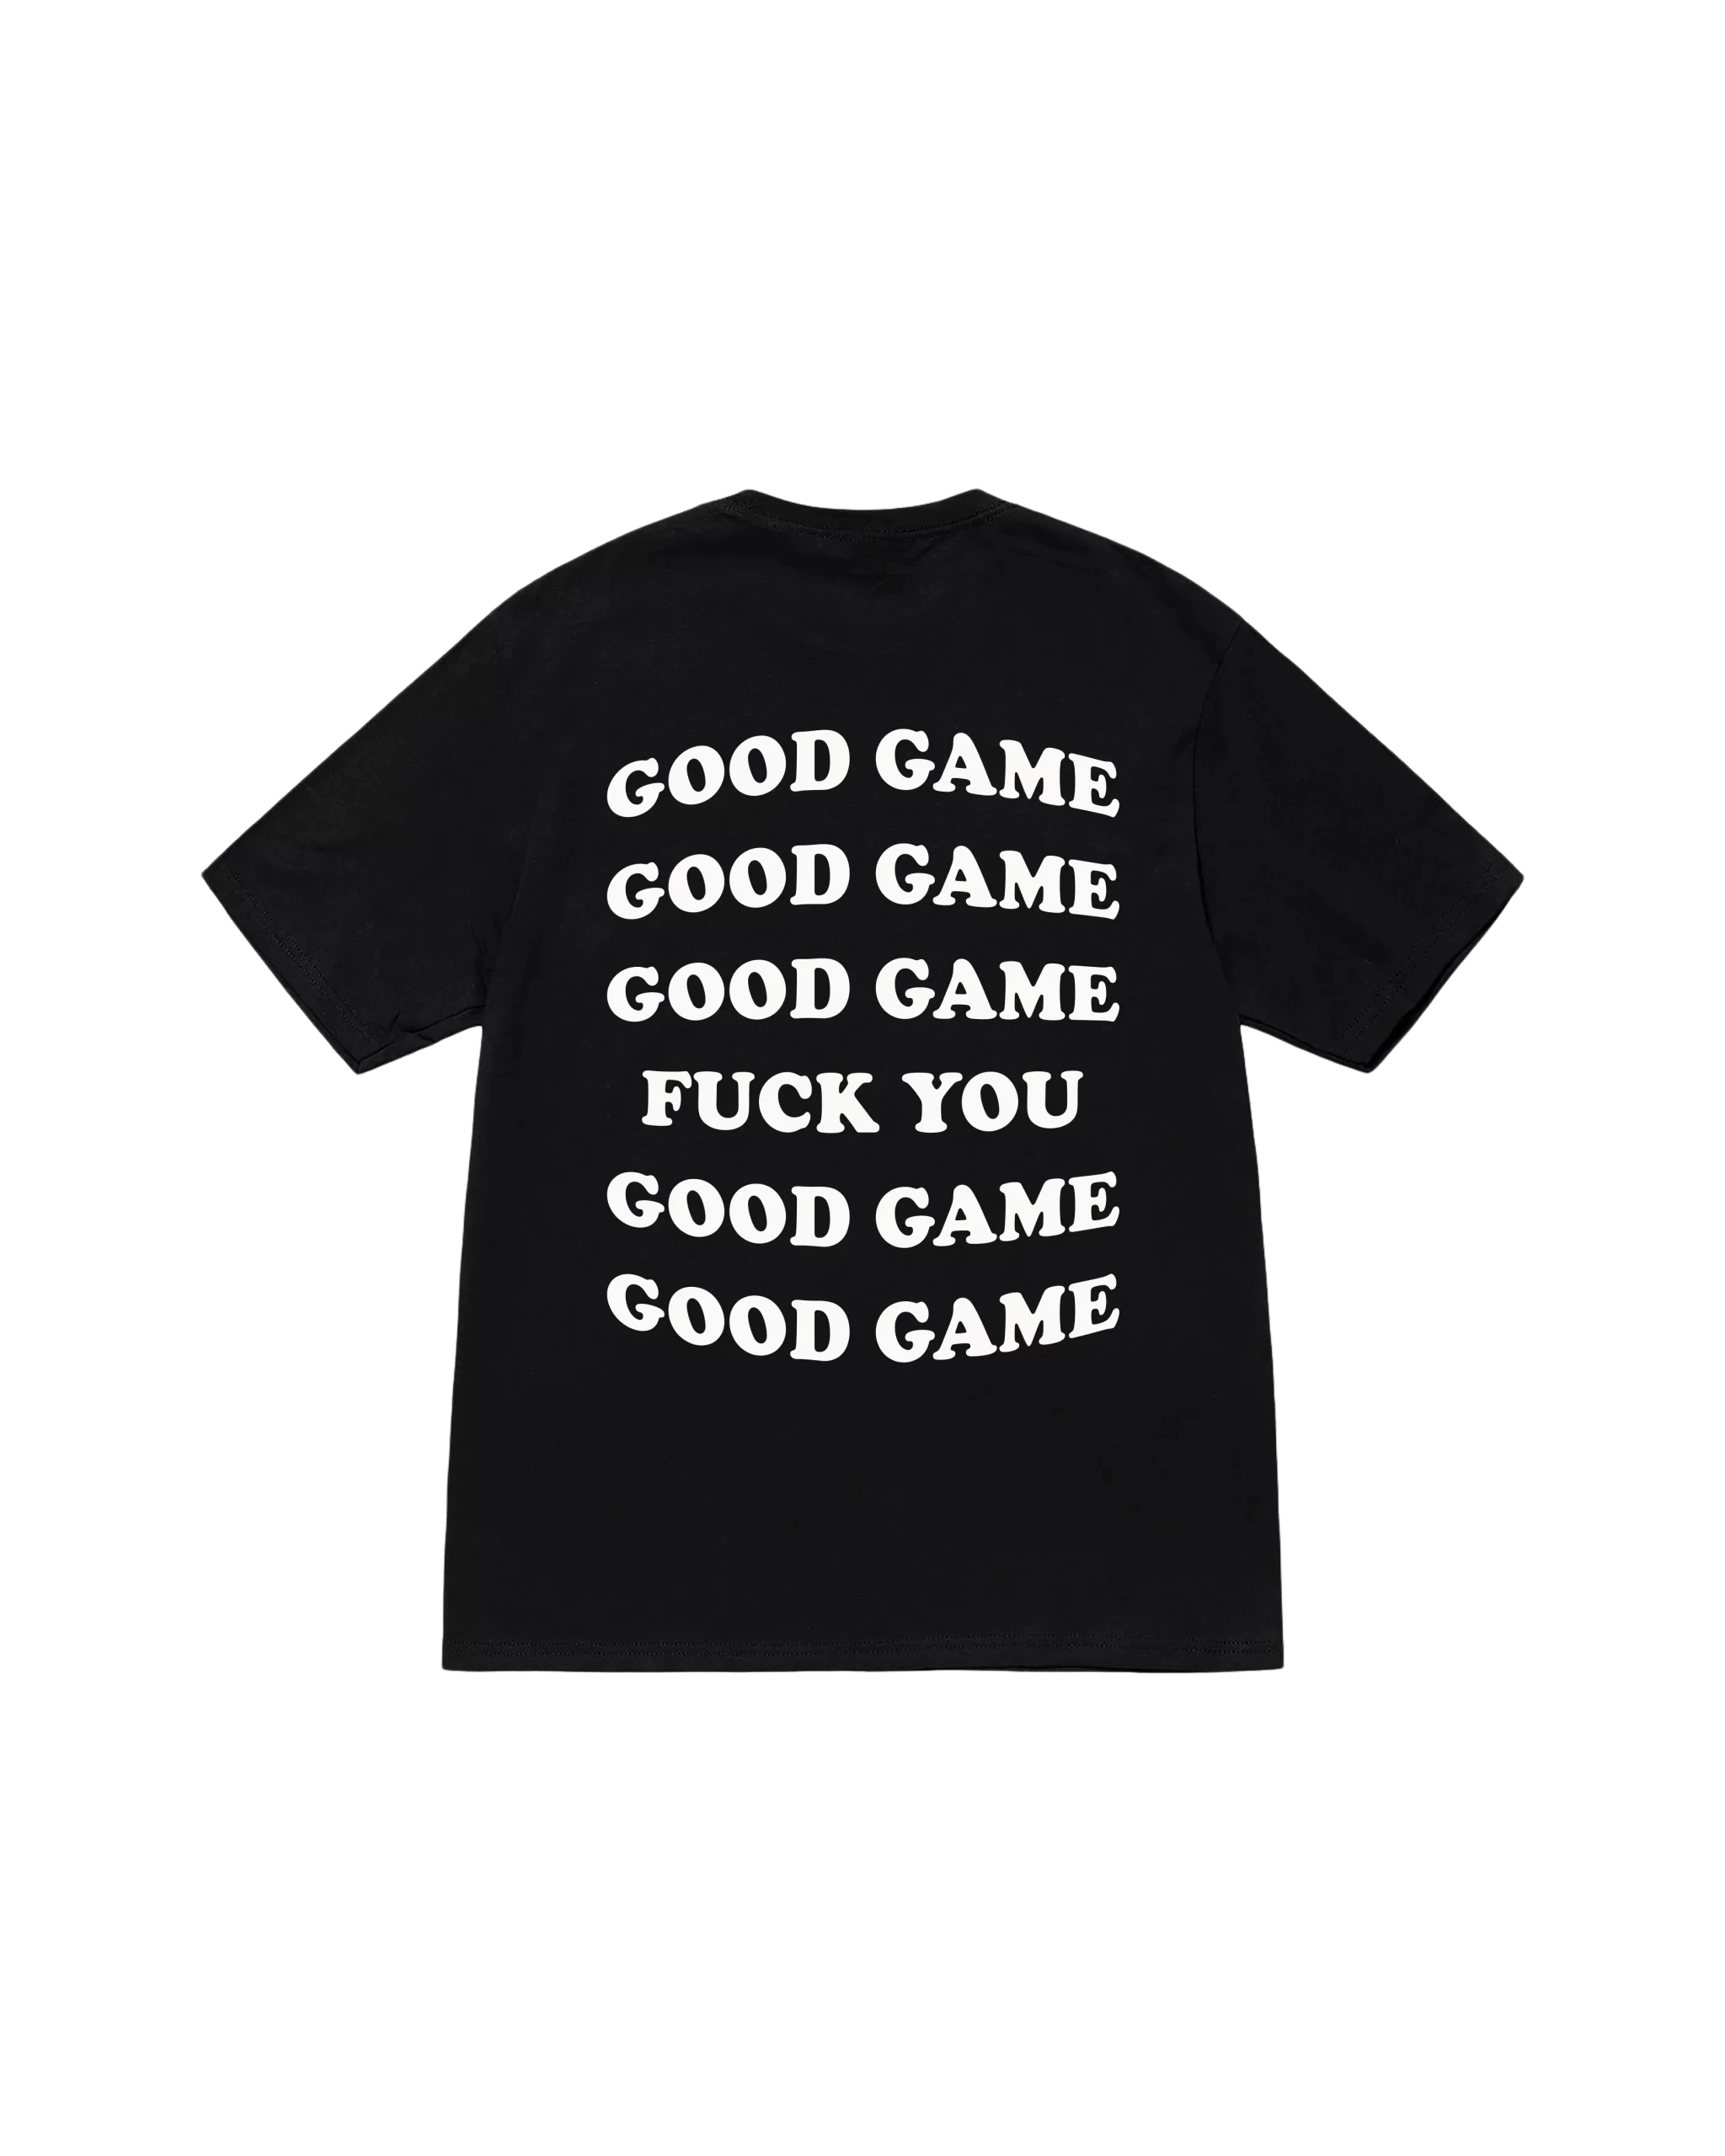 A black Good Game Tee featuring an expressive phrase.